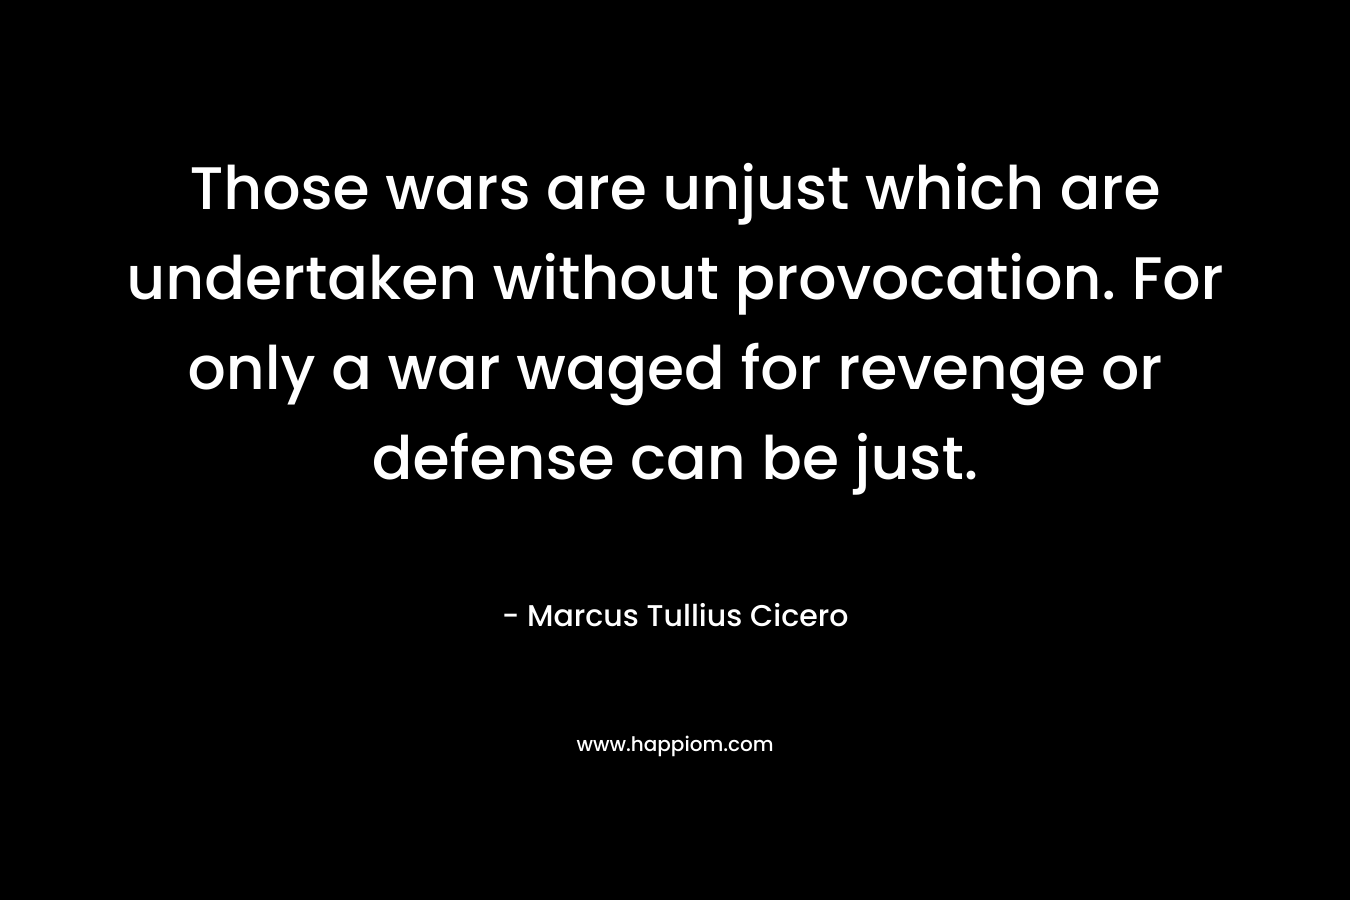 Those wars are unjust which are undertaken without provocation. For only a war waged for revenge or defense can be just. – Marcus Tullius Cicero